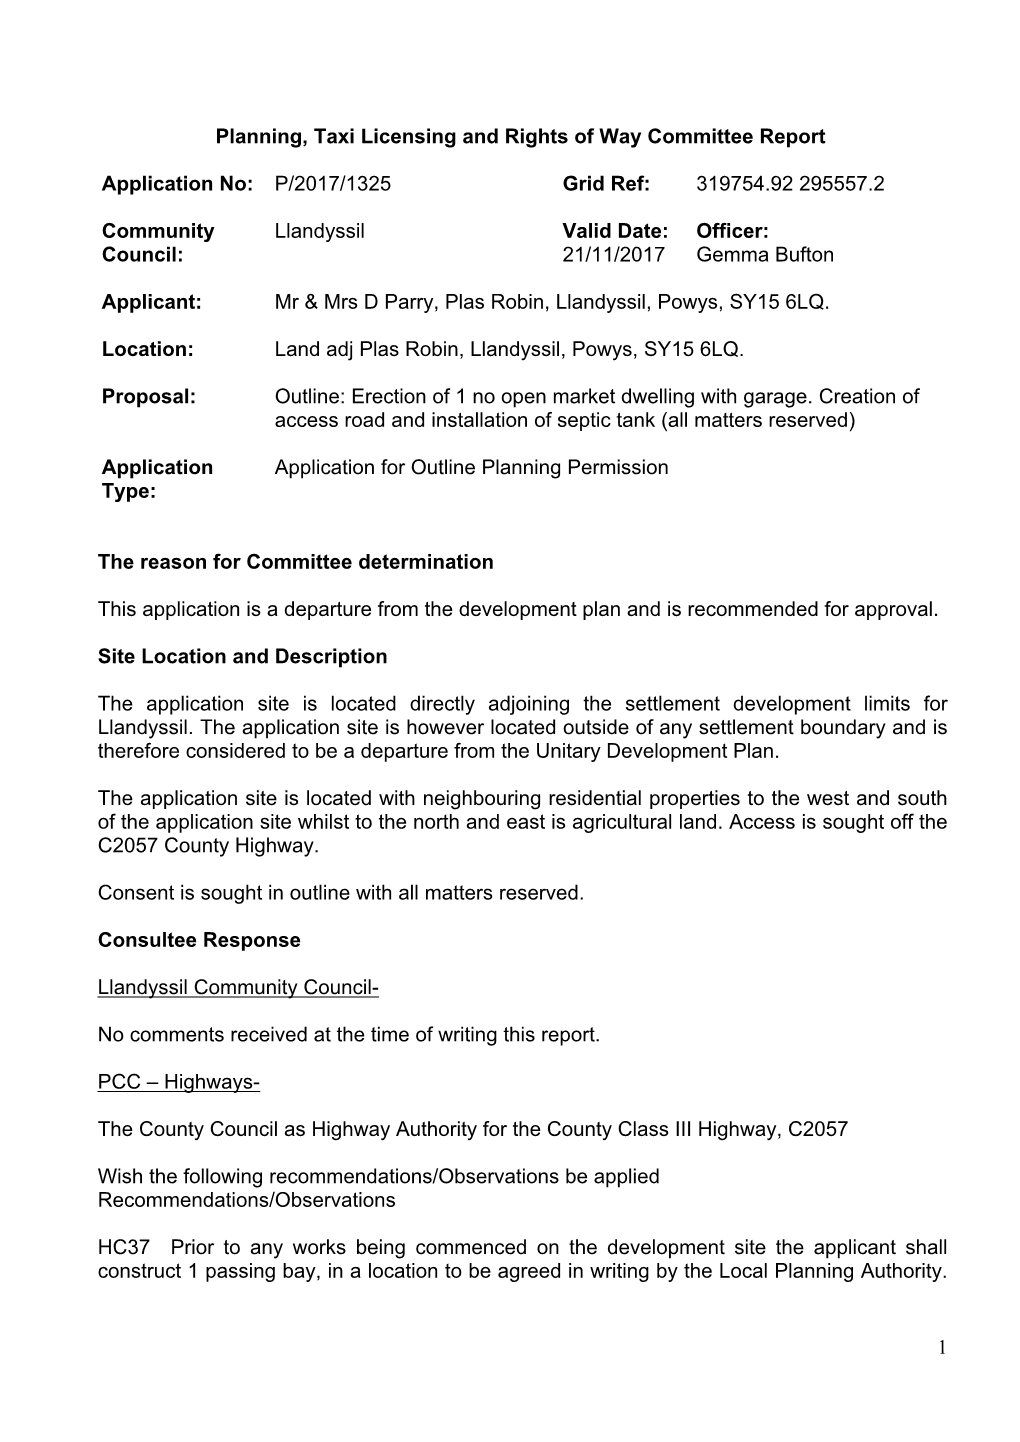 1 Planning, Taxi Licensing and Rights of Way Committee Report Application No: P/2017/1325 Grid Ref: 319754.92 295557.2 Community